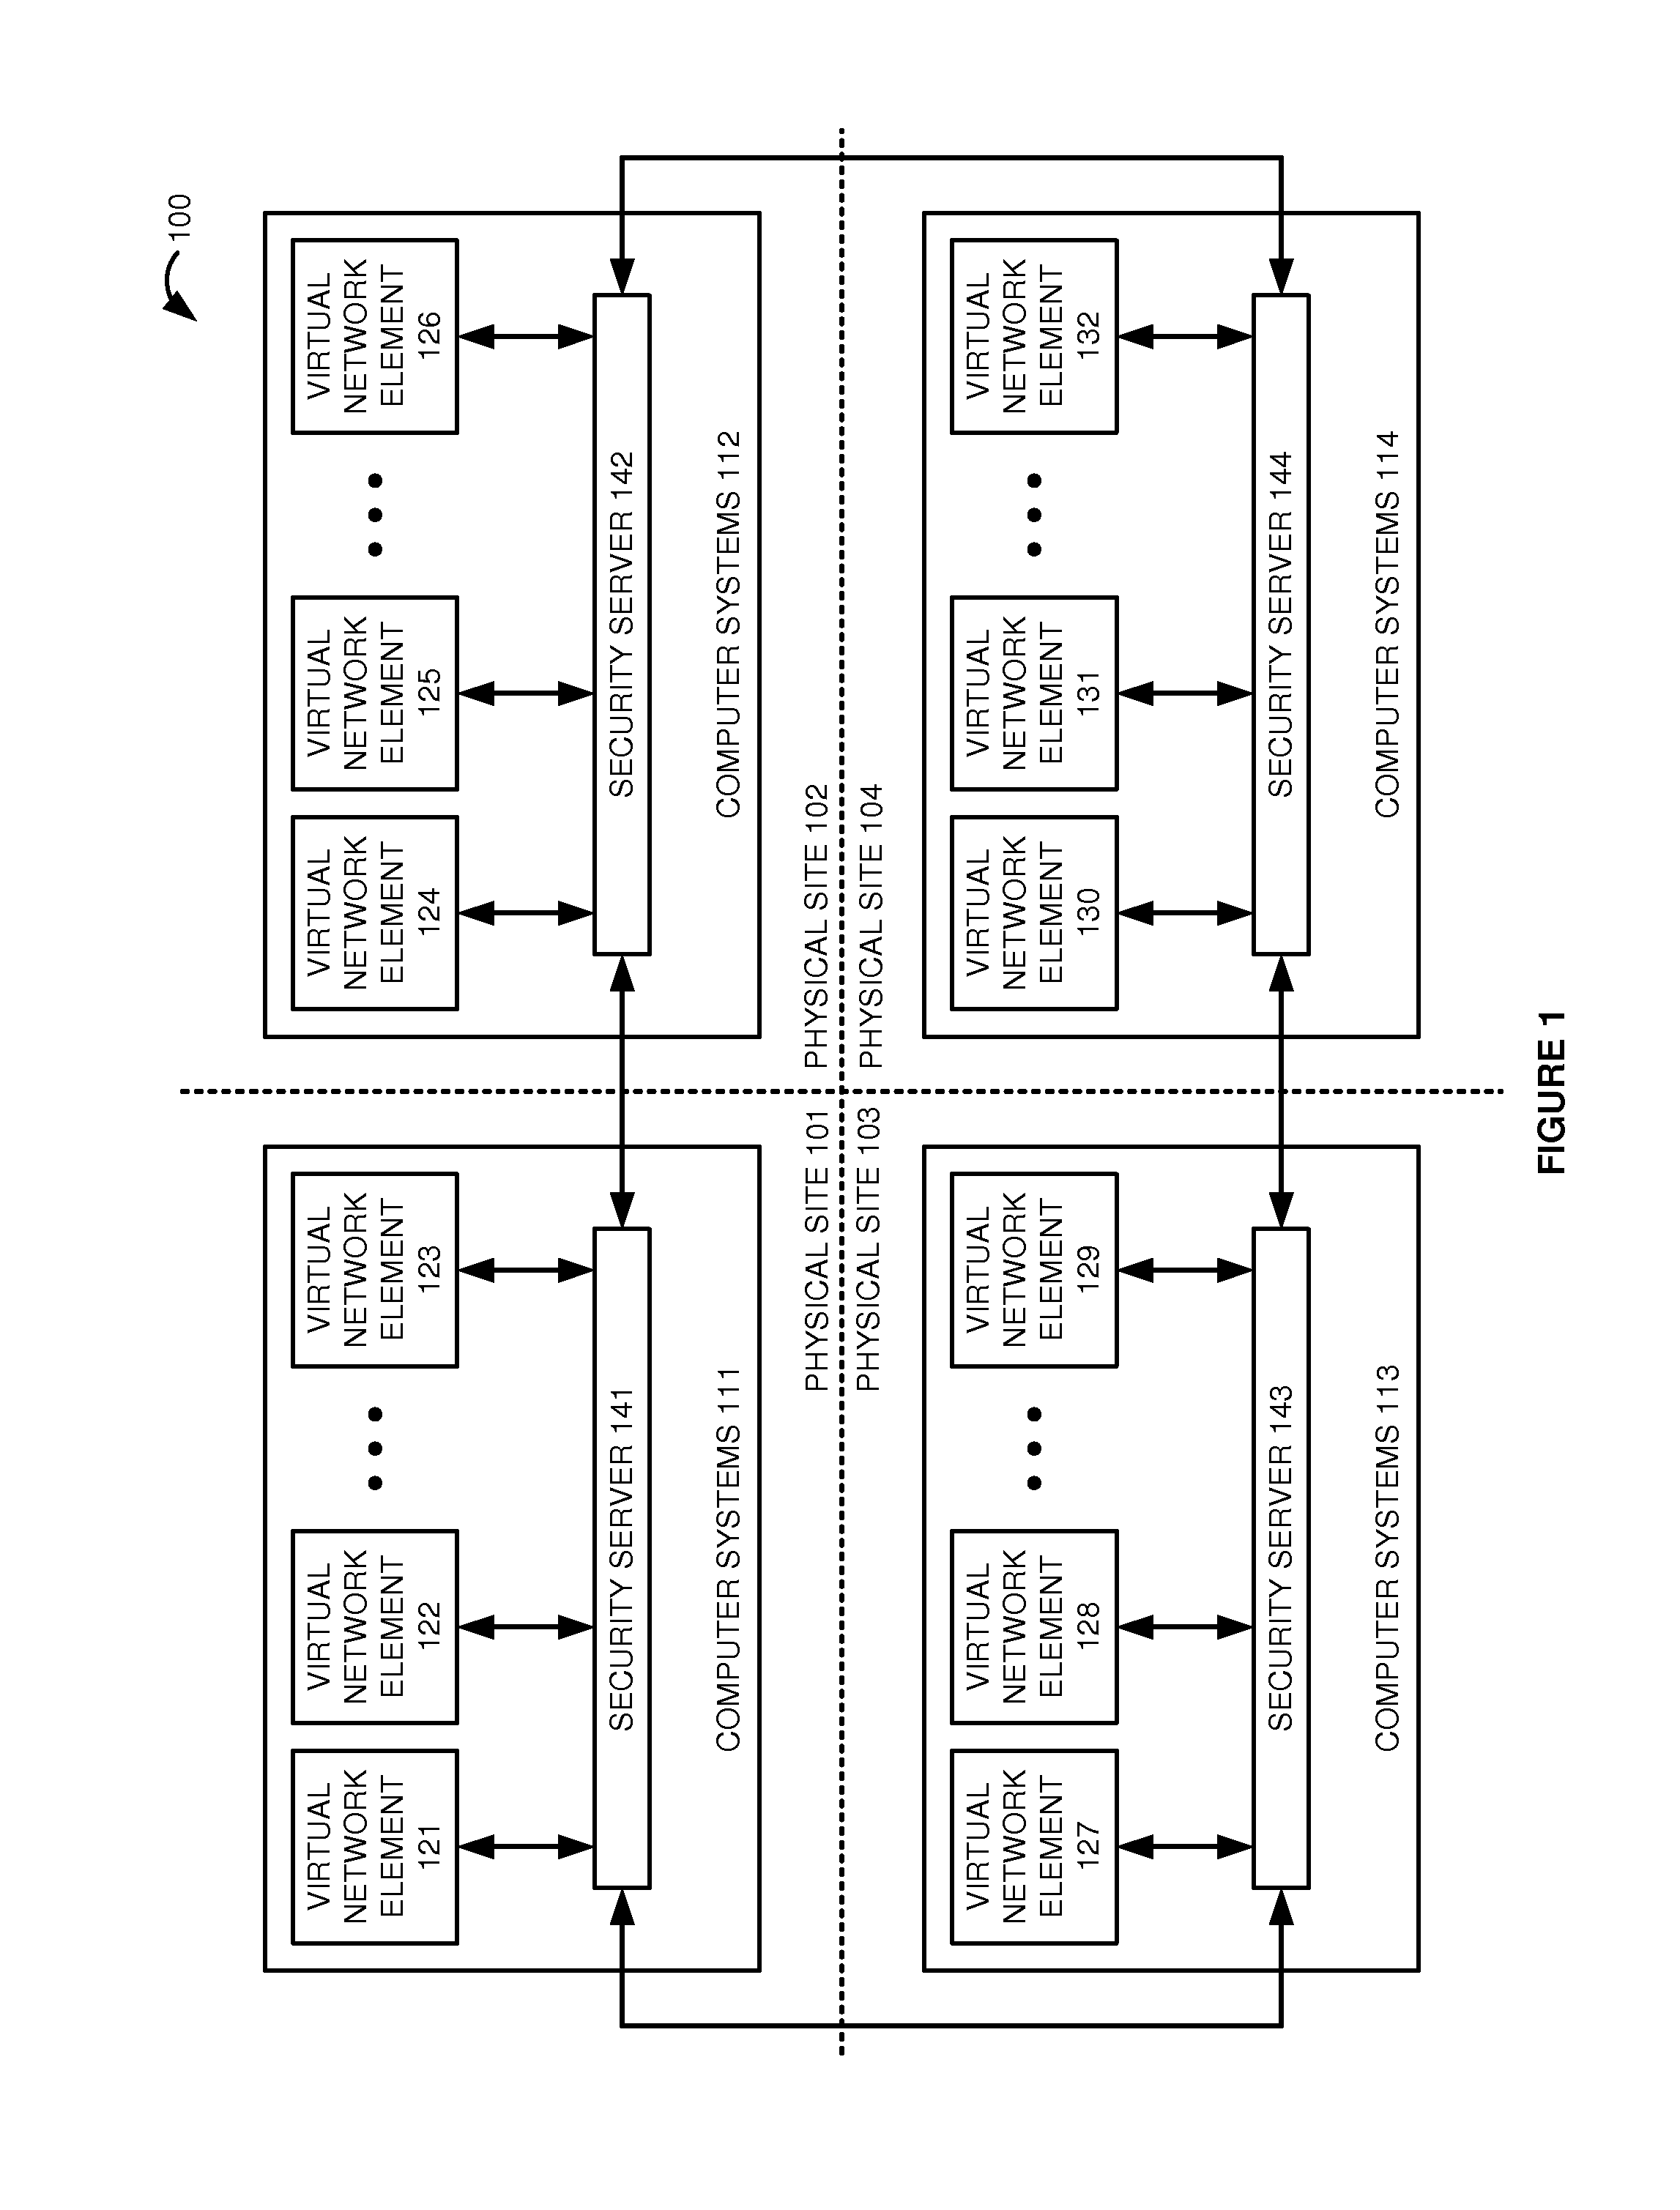 Computer system hardware validation for virtual communication network elements